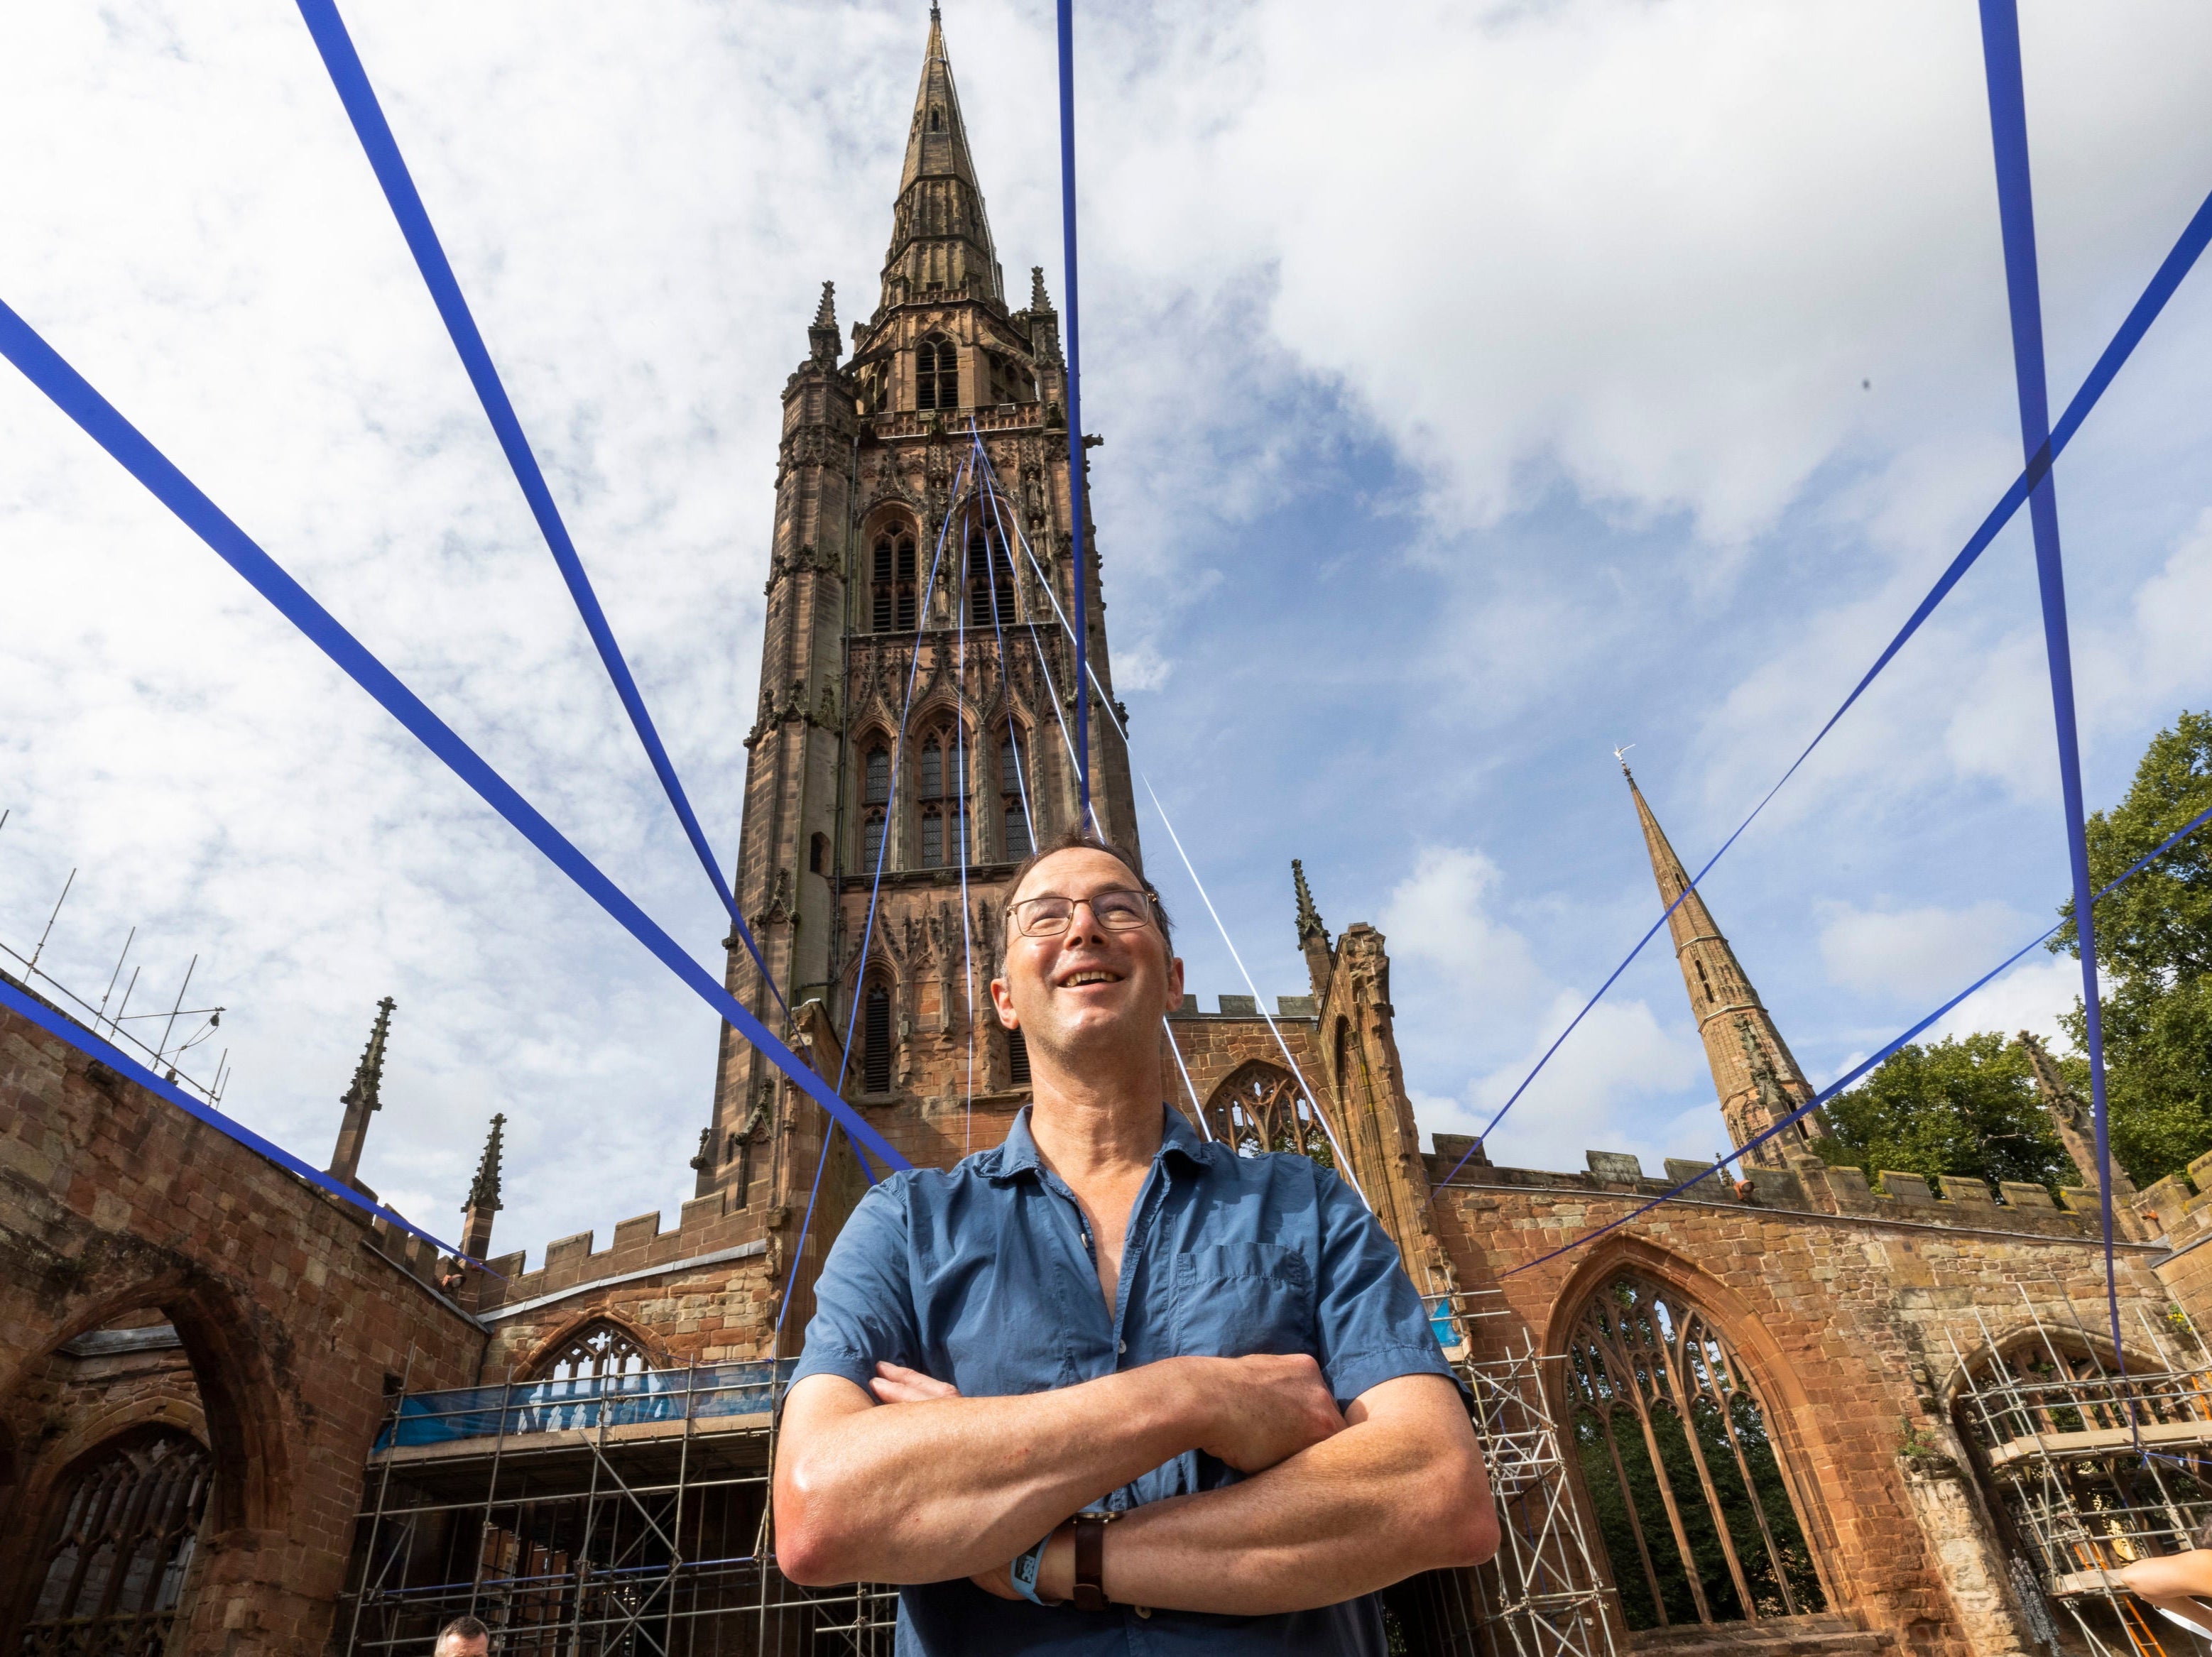 Artist Tom Piper at his Ribbon Installation at Coventry Cathedral as part of Coventry City of Culture's Faith event, which has been co-created with the Royal Shakespeare Company